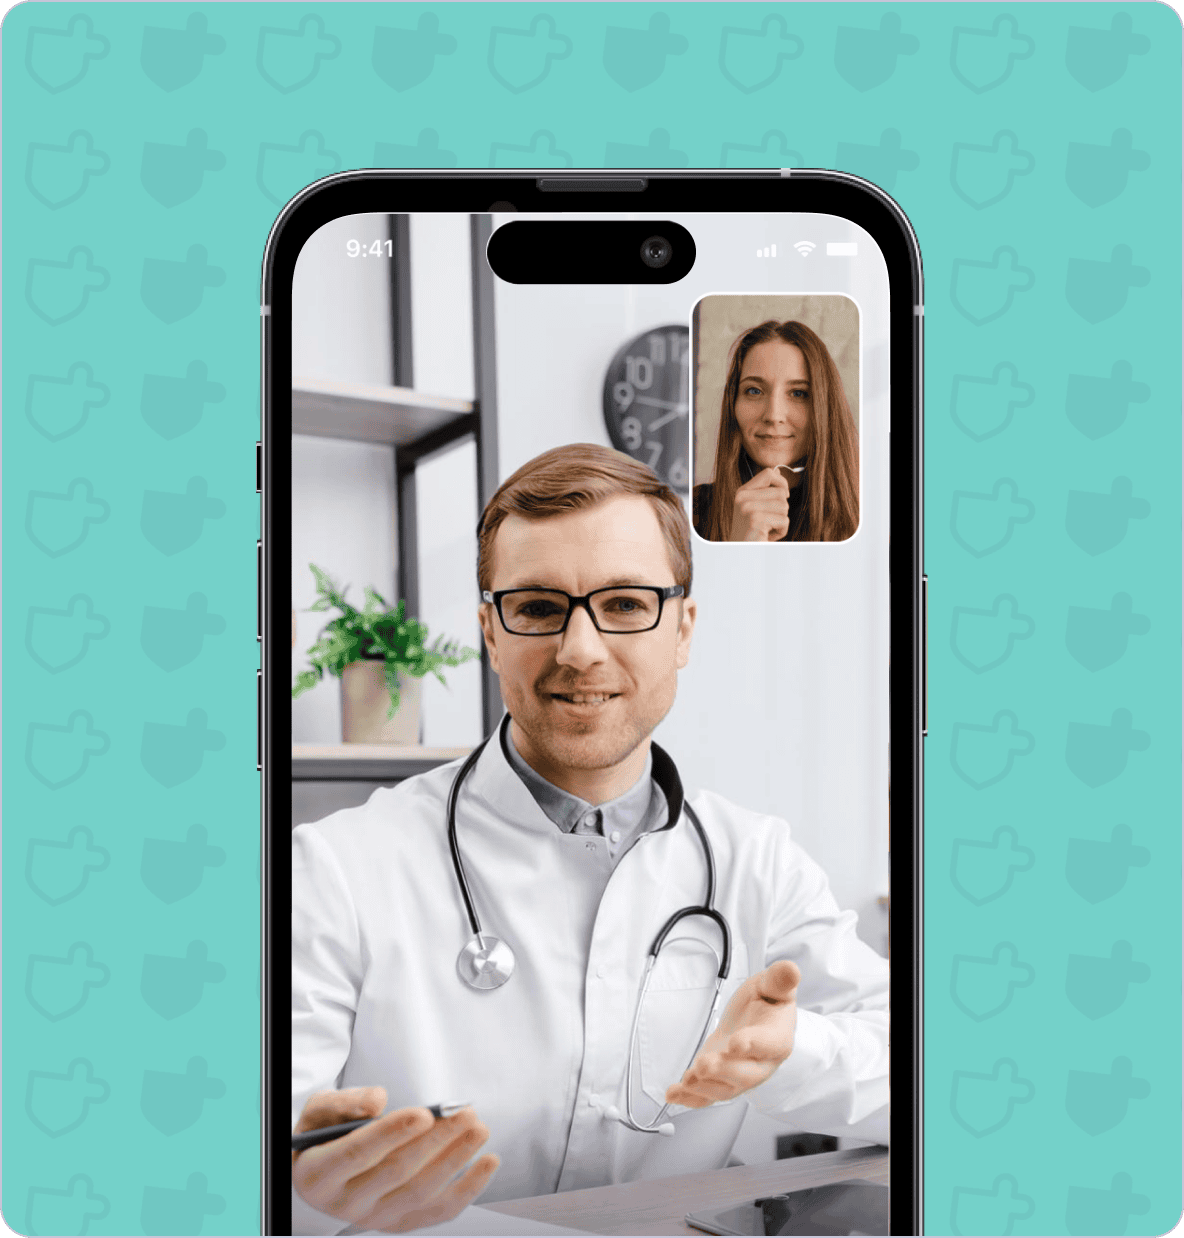 A doctor in a white coat with a stethoscope around his neck converses via video call with a woman appearing in a smaller window on a smartphone screen with a teal background.